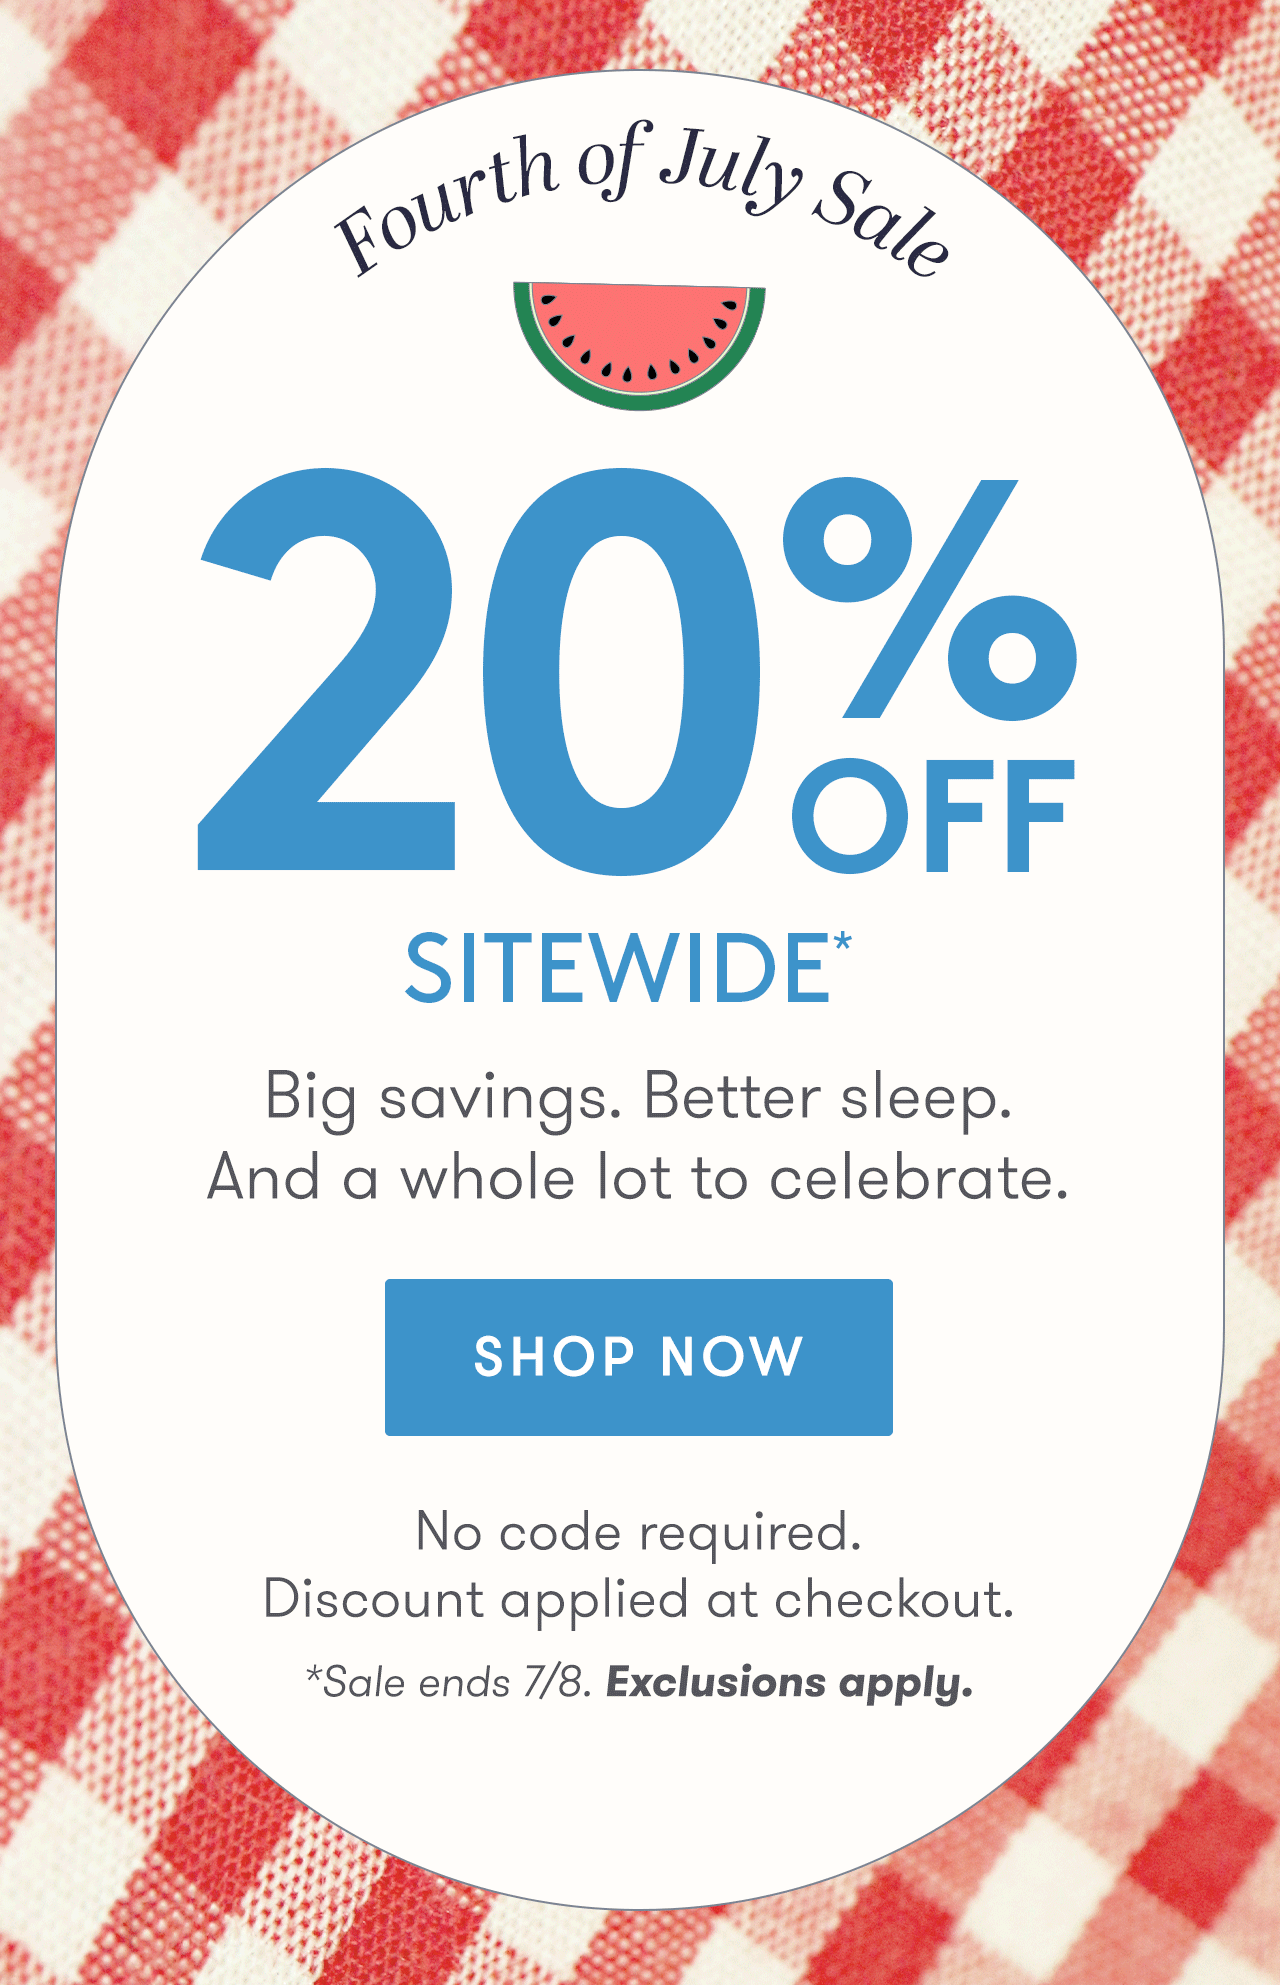 Big savings. Better sleep. And a whole lot to celebrate. Take 20% off sitewide* now!